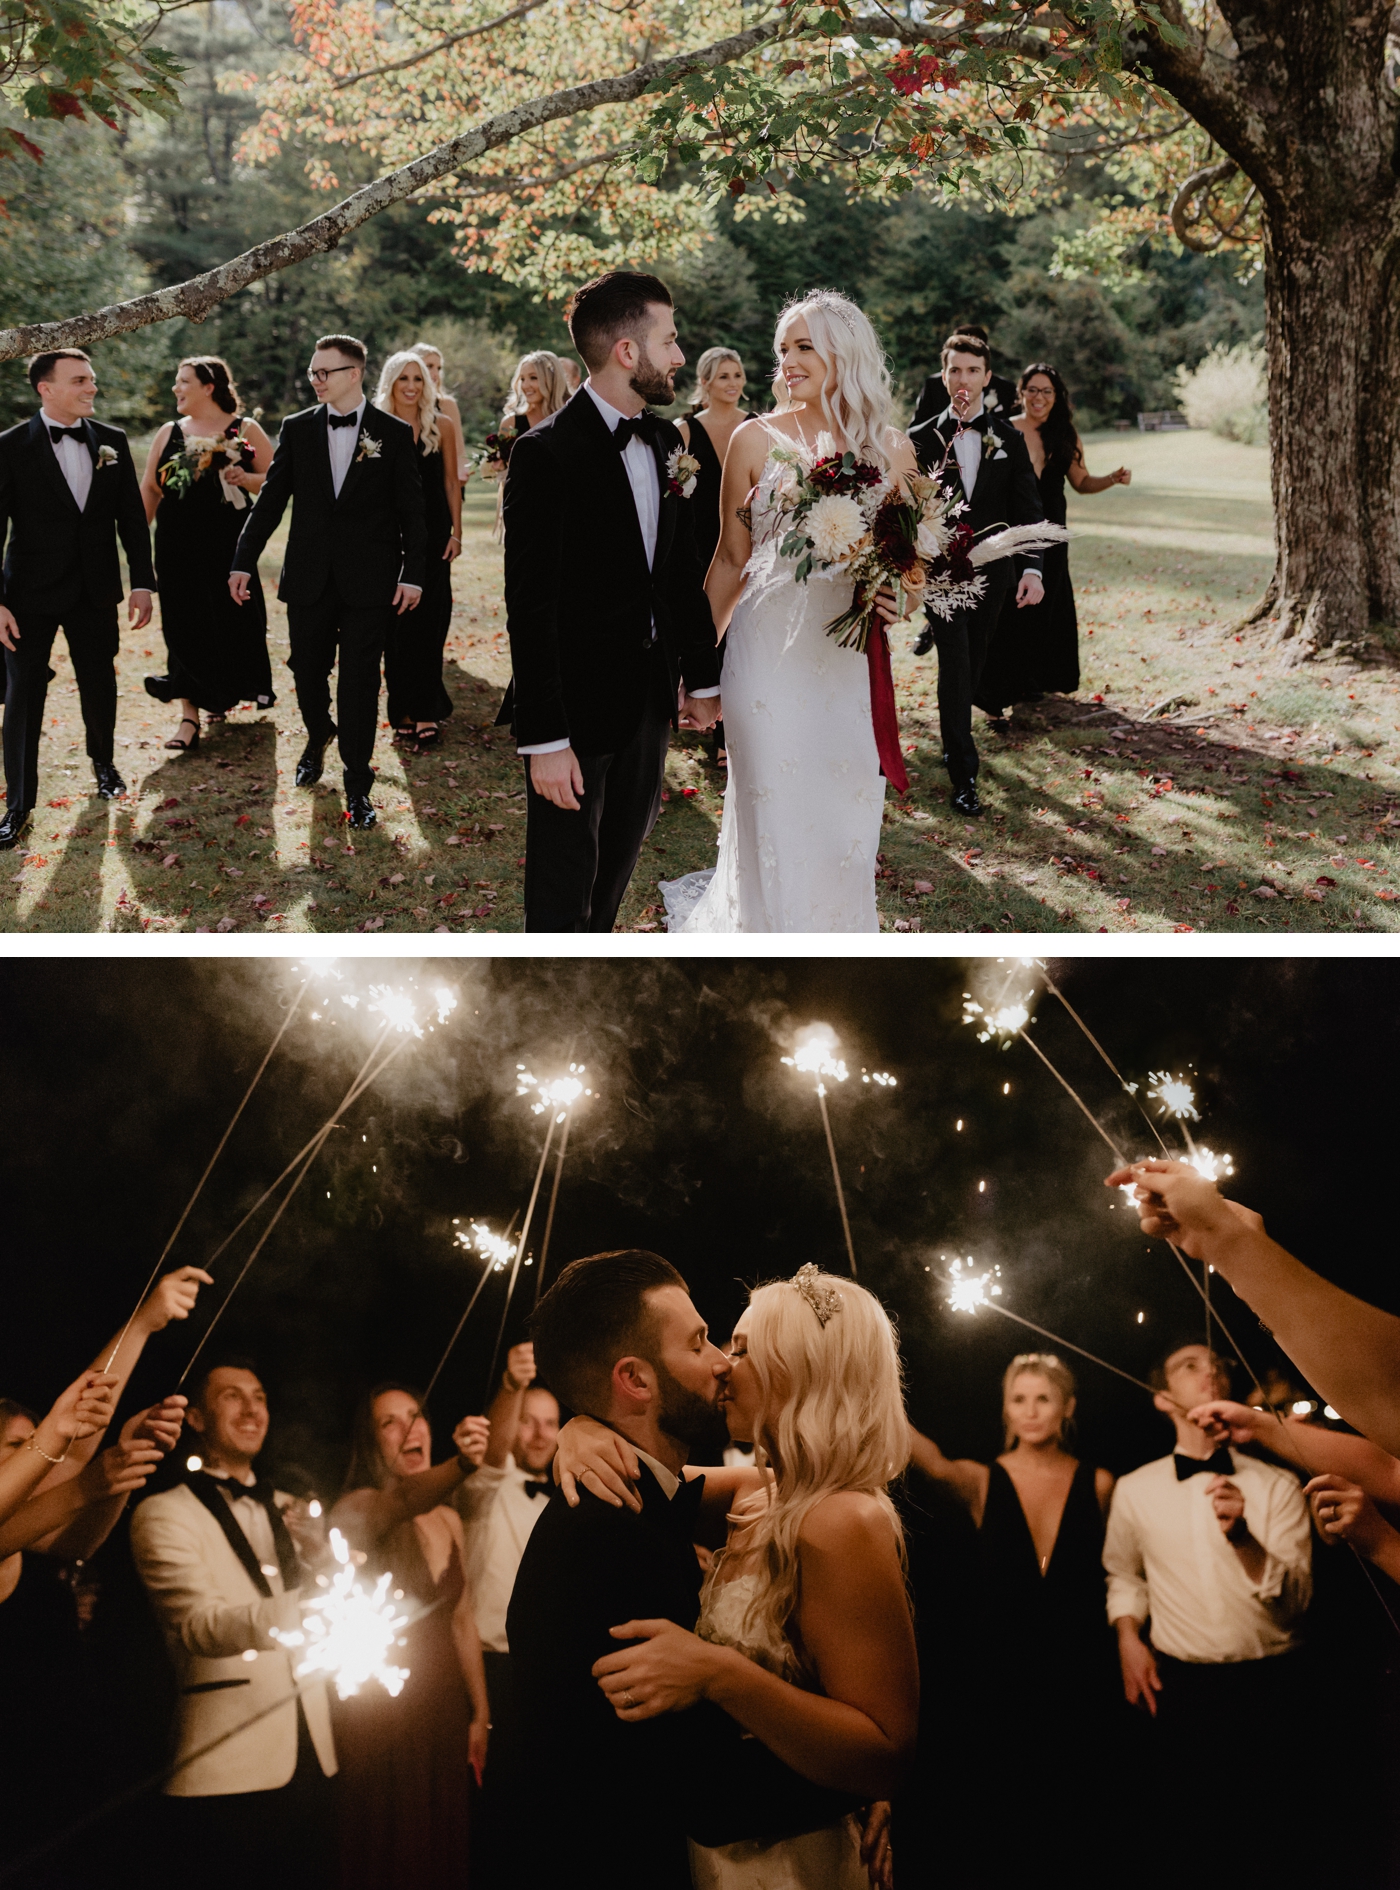 Mistakes to Avoid When Choosing a Wedding Photographer